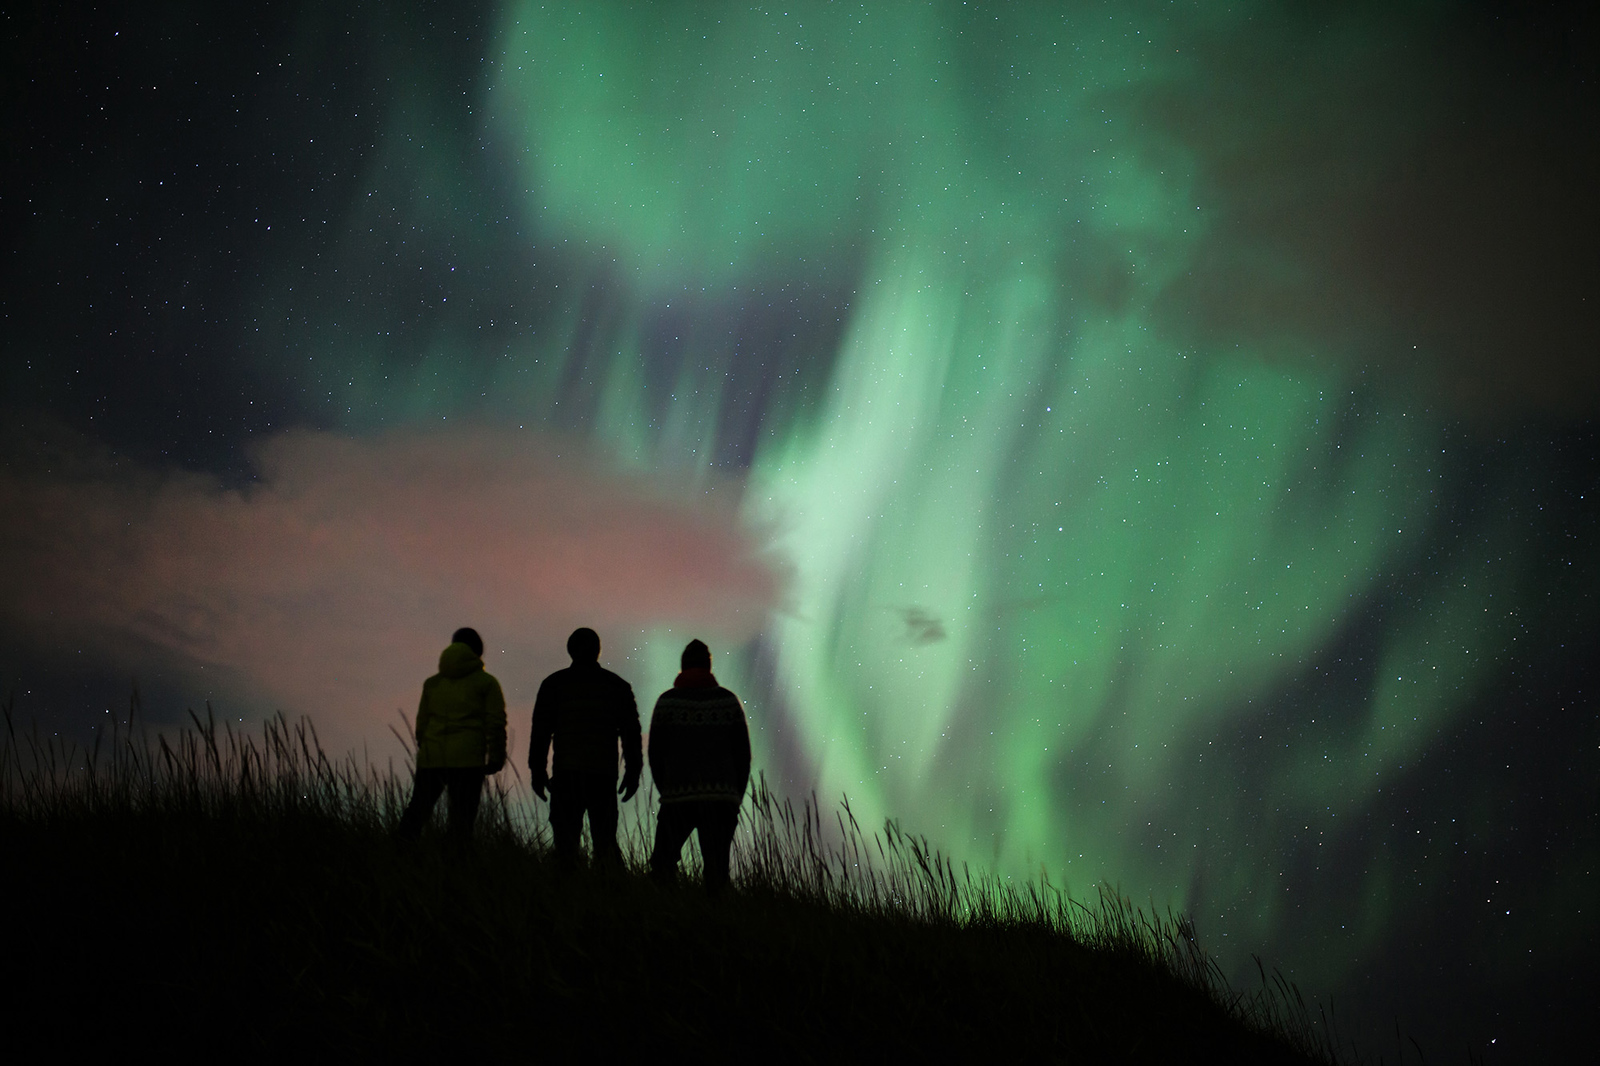 Silhouettes of people watching the aurora borealis.